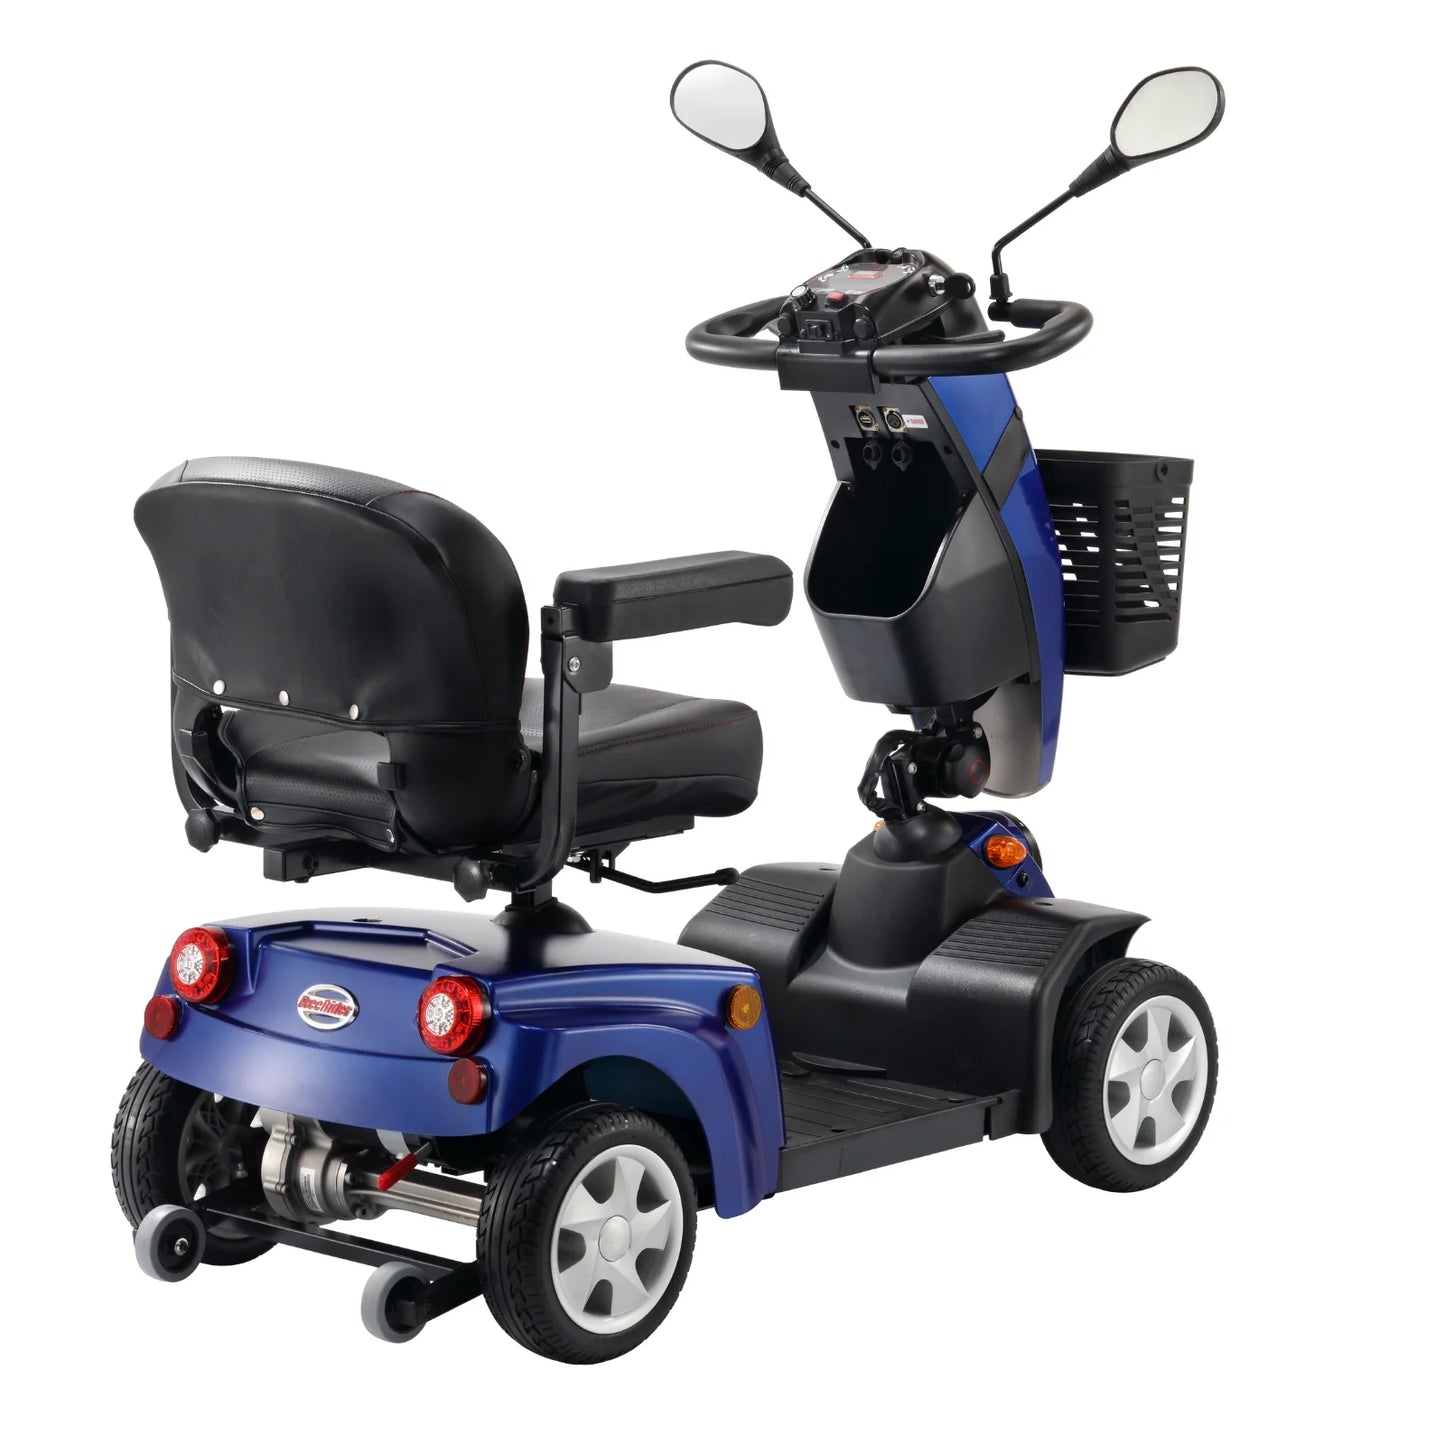 FreeRider FR1 City Mid-Size Mobility Scooter